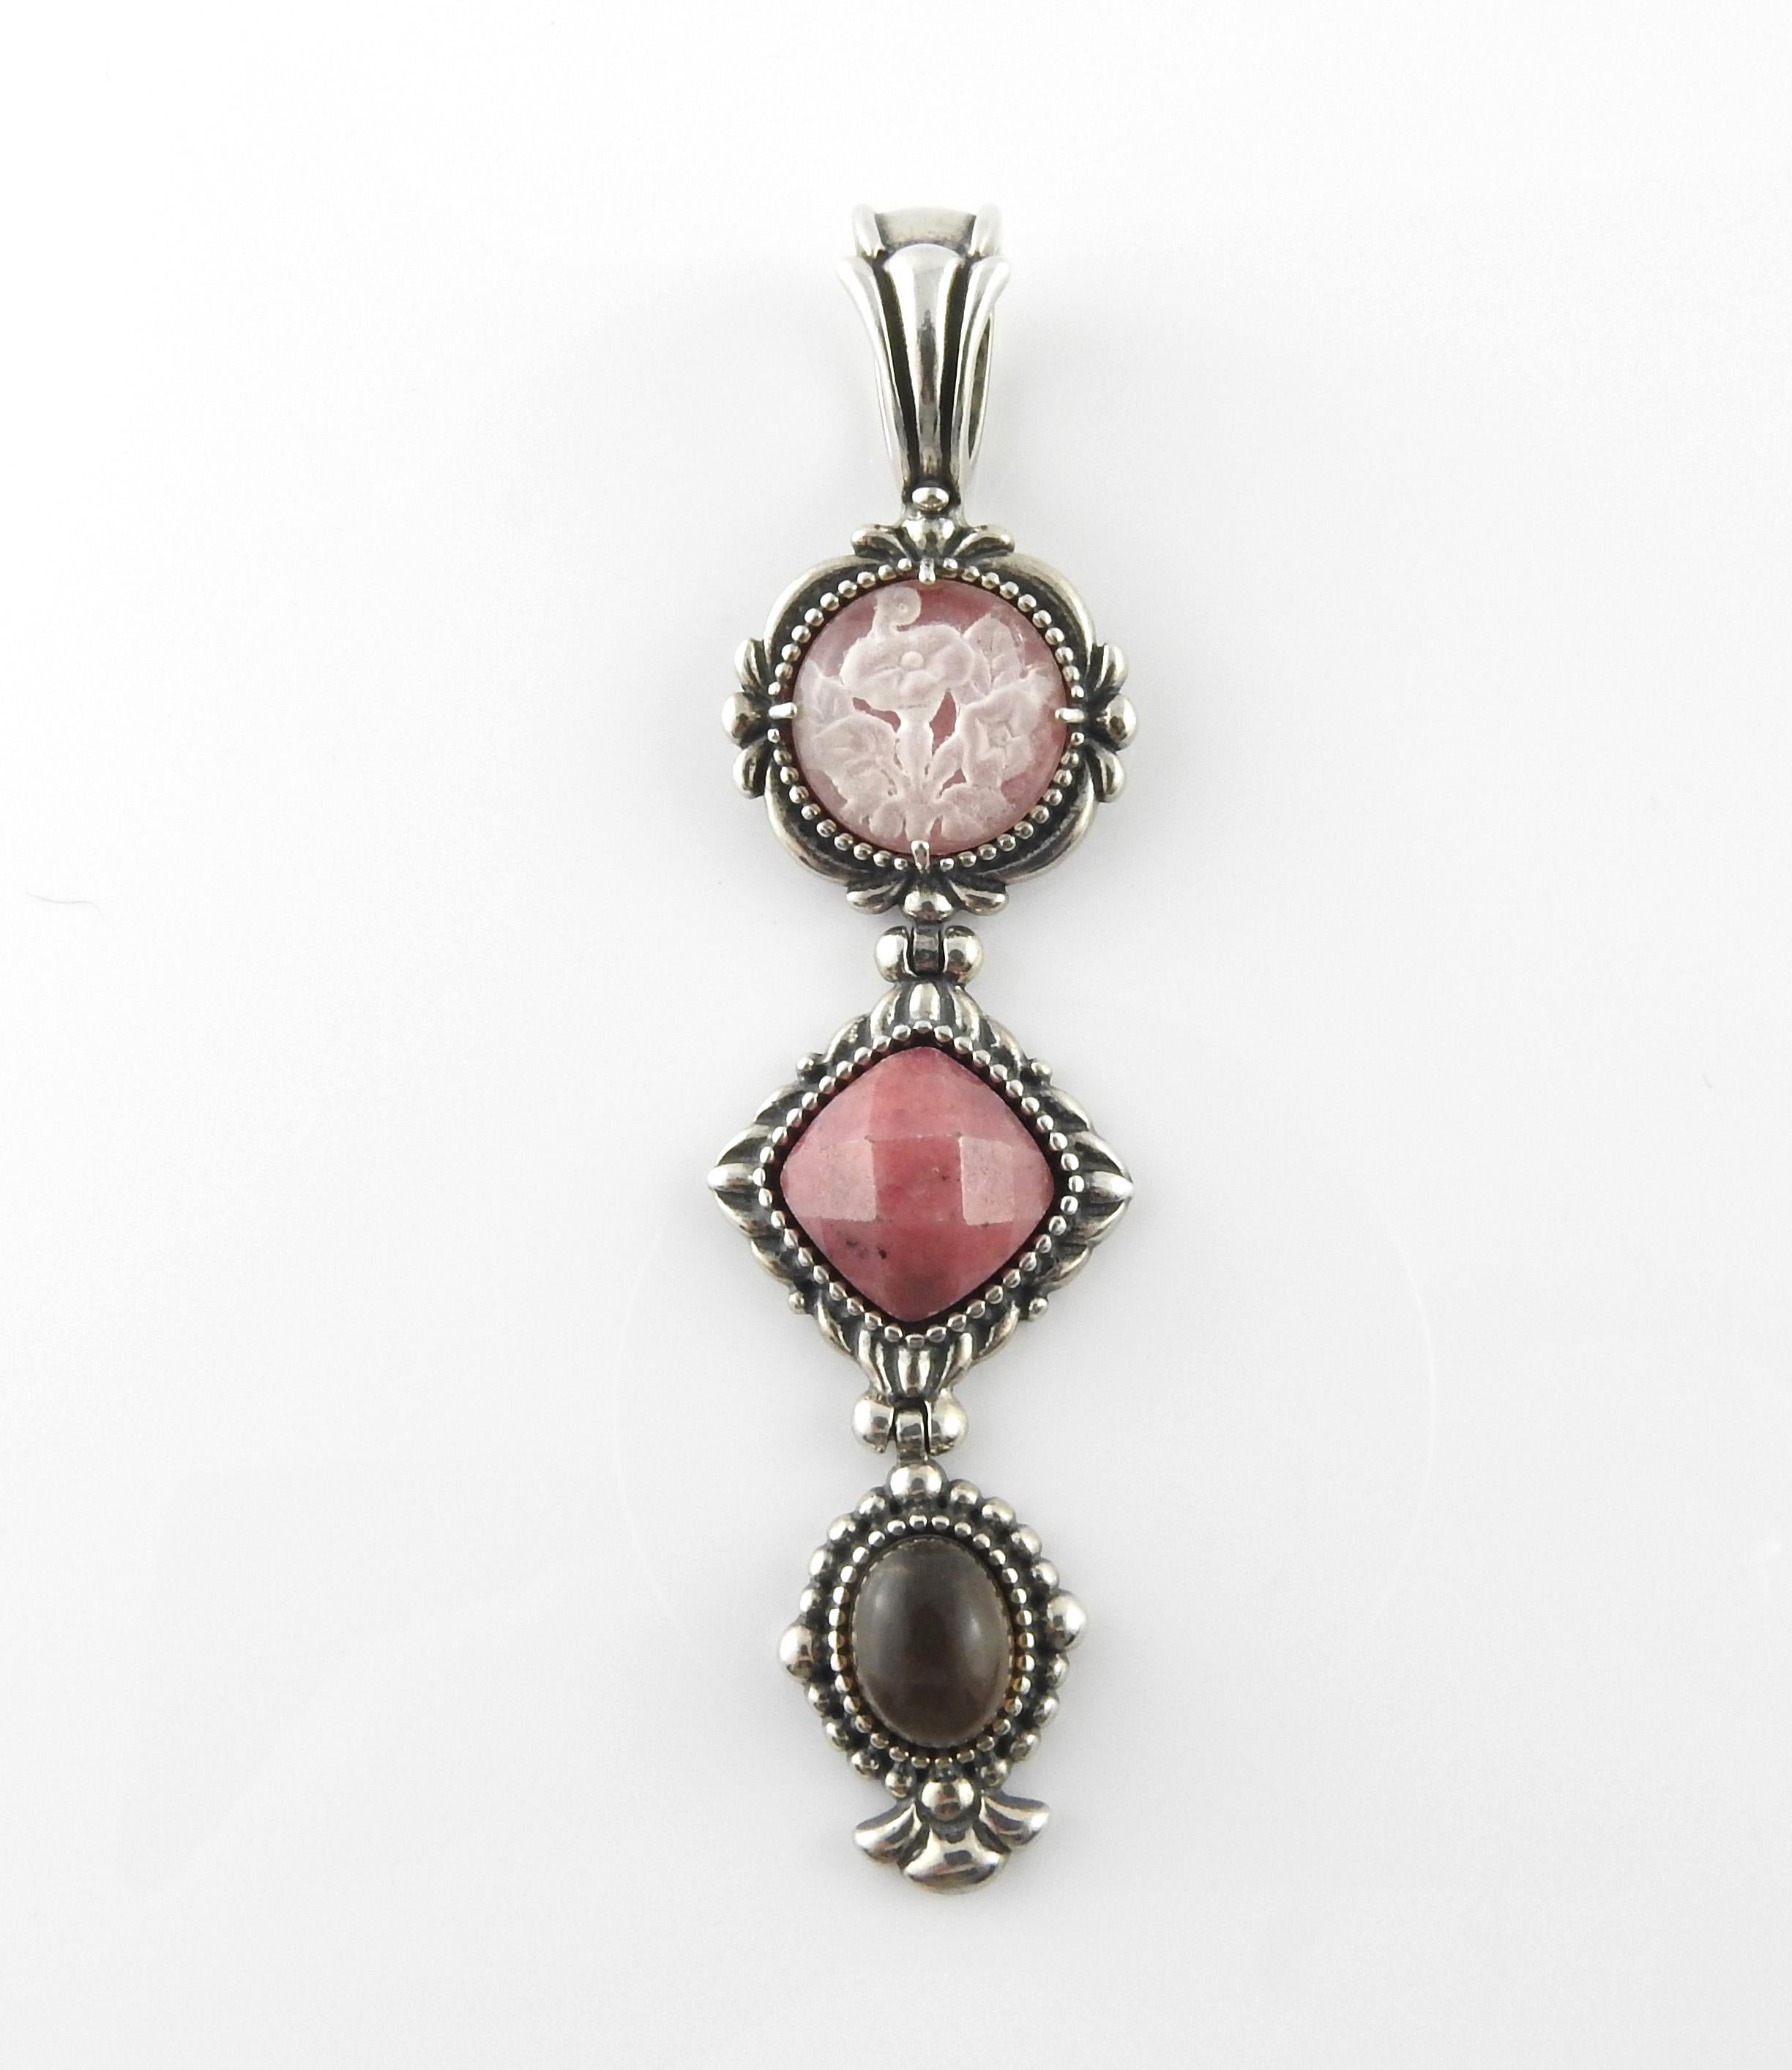 Carolyn Pollack Sterling Silver Carved Pink Quartz and Rhodonite Enhancer

3 stone Sterling Silver Necklace Pendant from Carolyn Pollack Collection. Top stone is cut with a flower design, followed by Pink Rhodonite, with a quartz stone on the